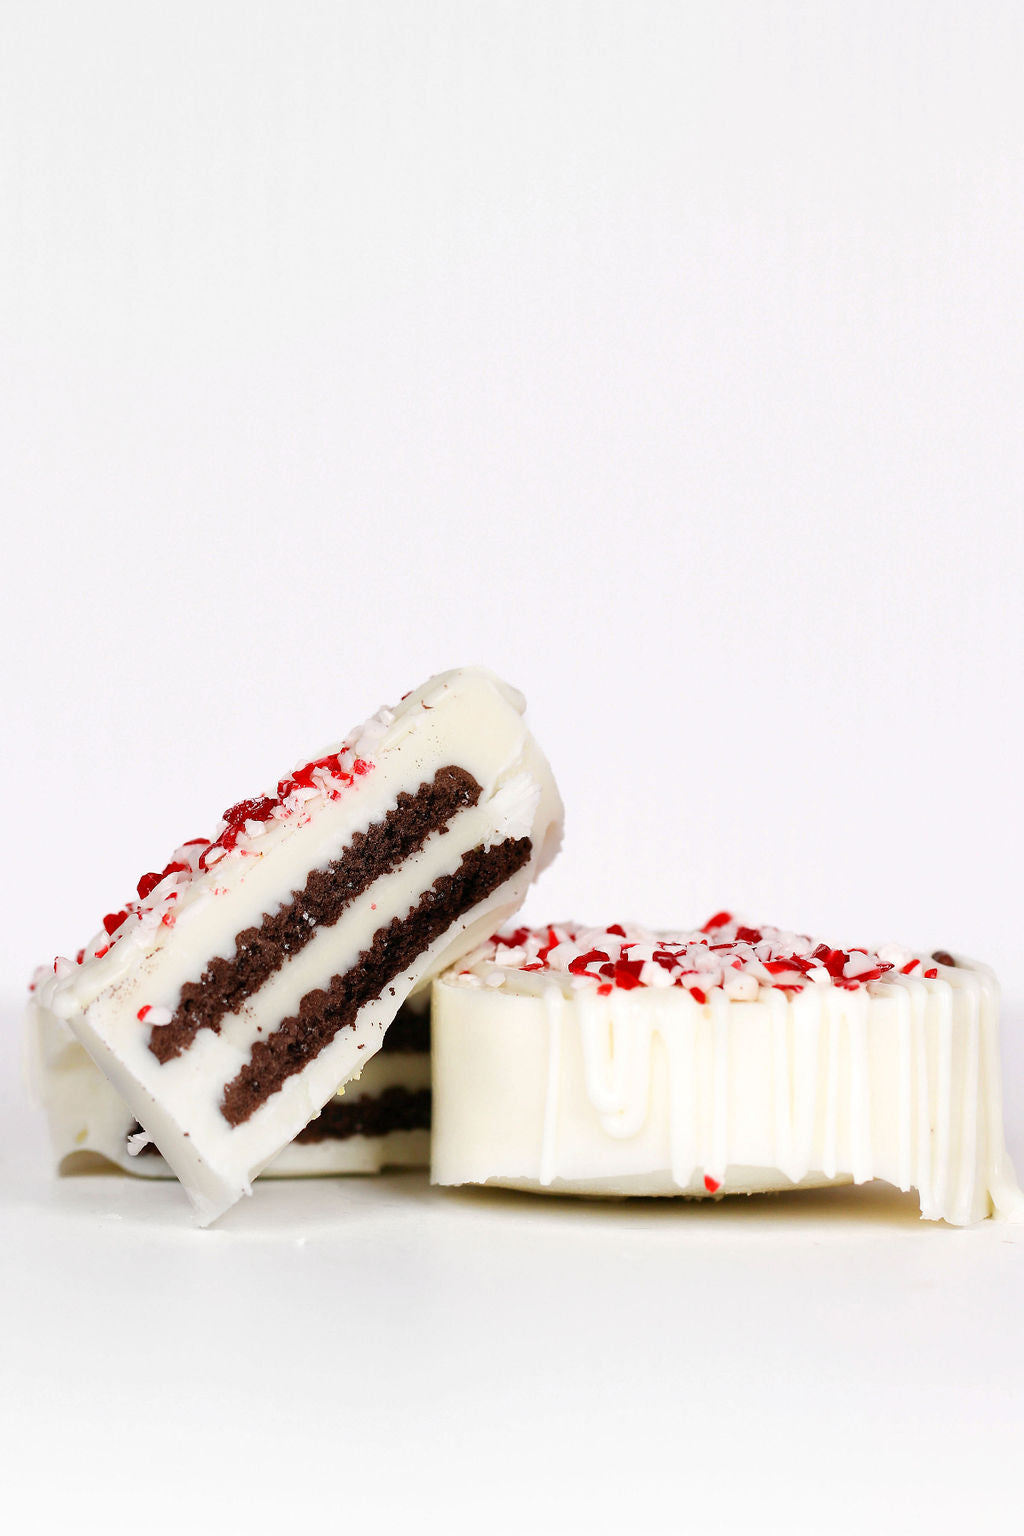 Gourmet Peppermint Chocolate Covered Oreos